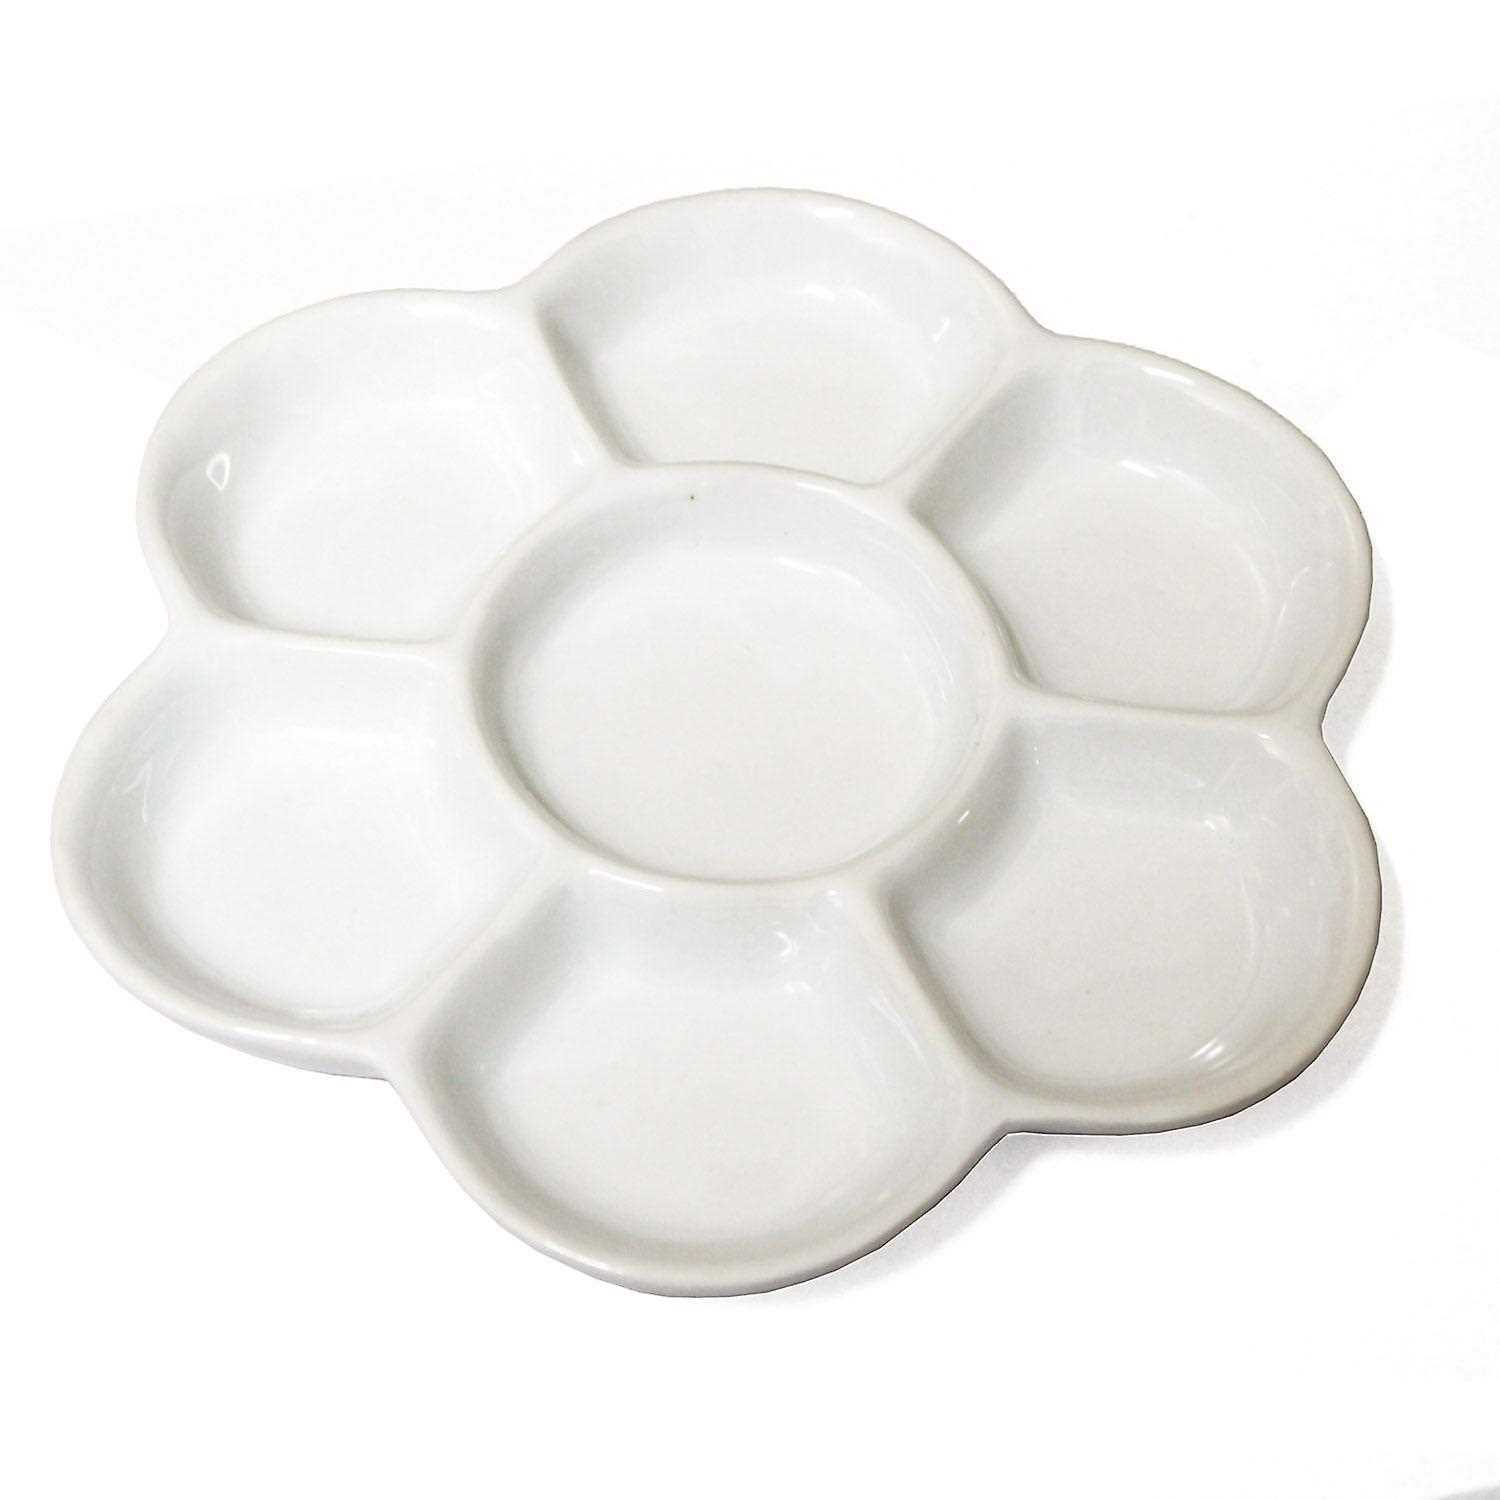 Glazed porcelain flower palettes with seven wells are available in-store and online at The PaintBox, home to the widest range of traditional and progressive Art Supplies in Adelaide.